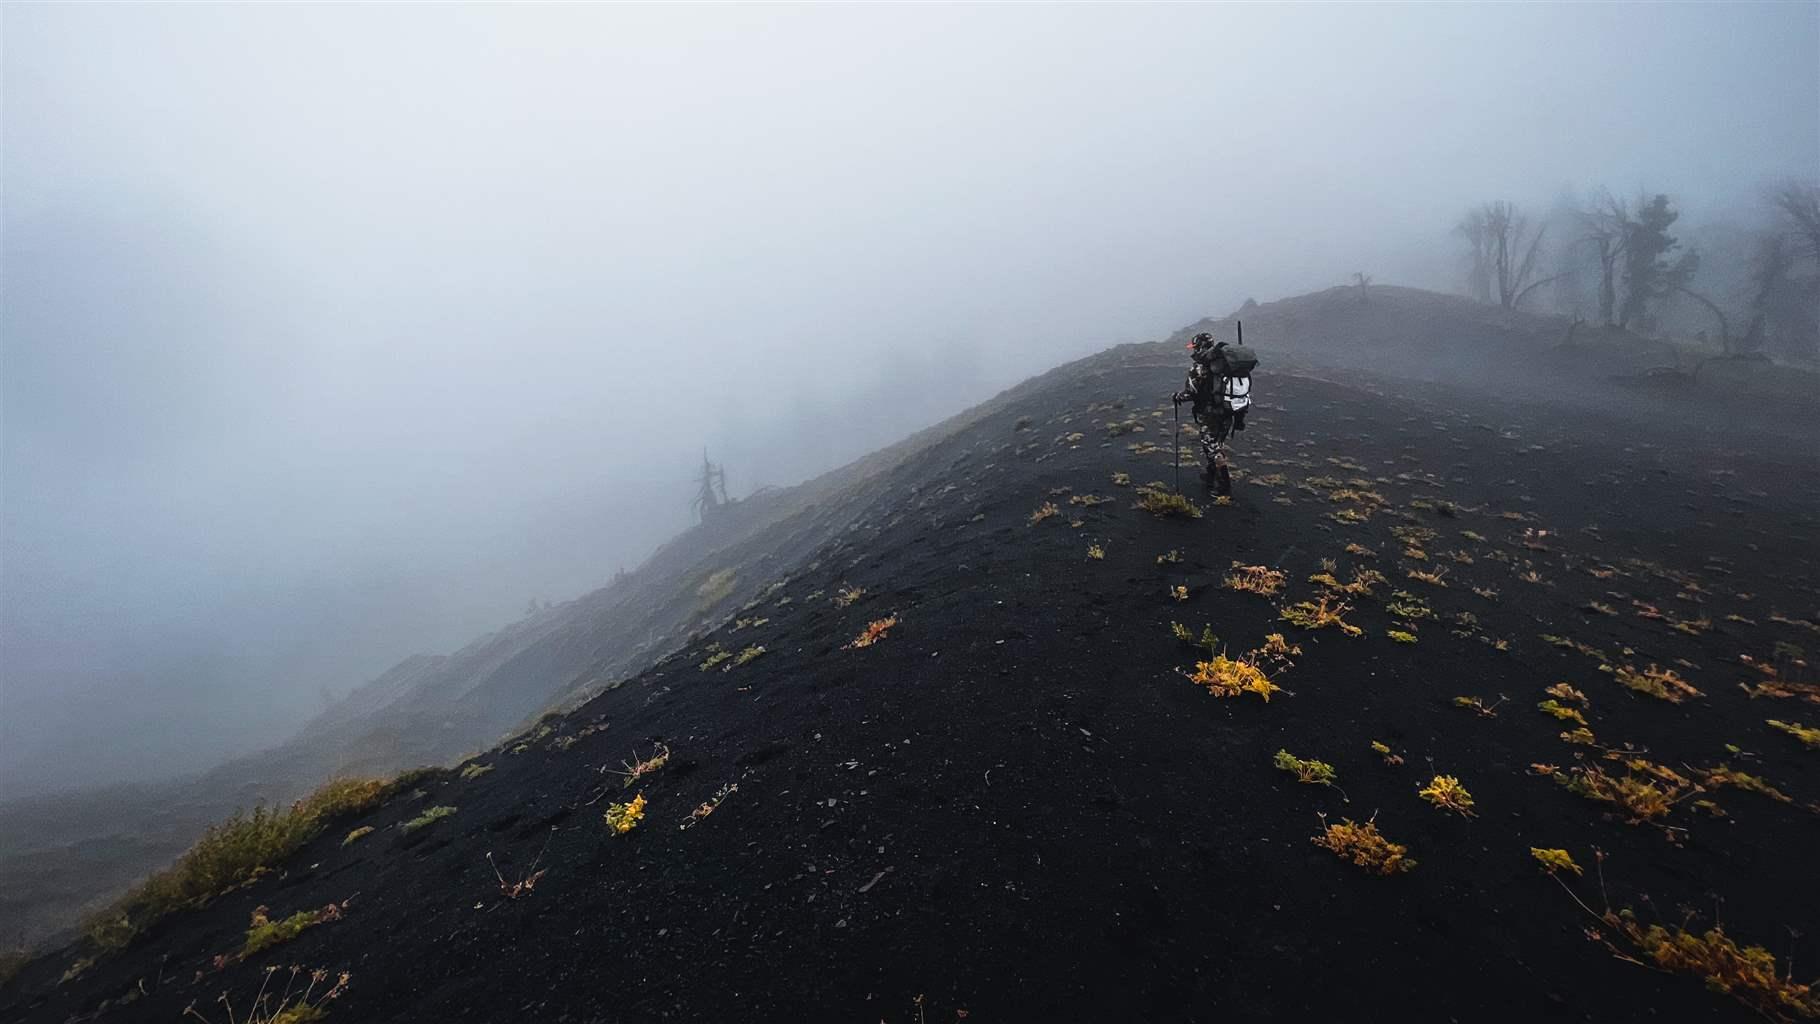 A man wearing a large, outdoors-style backpack walks through heavy mist along a ridge of darkened soil, which is pocked here and there by flowering yellow ground brush, with trees faintly visible in the background. 